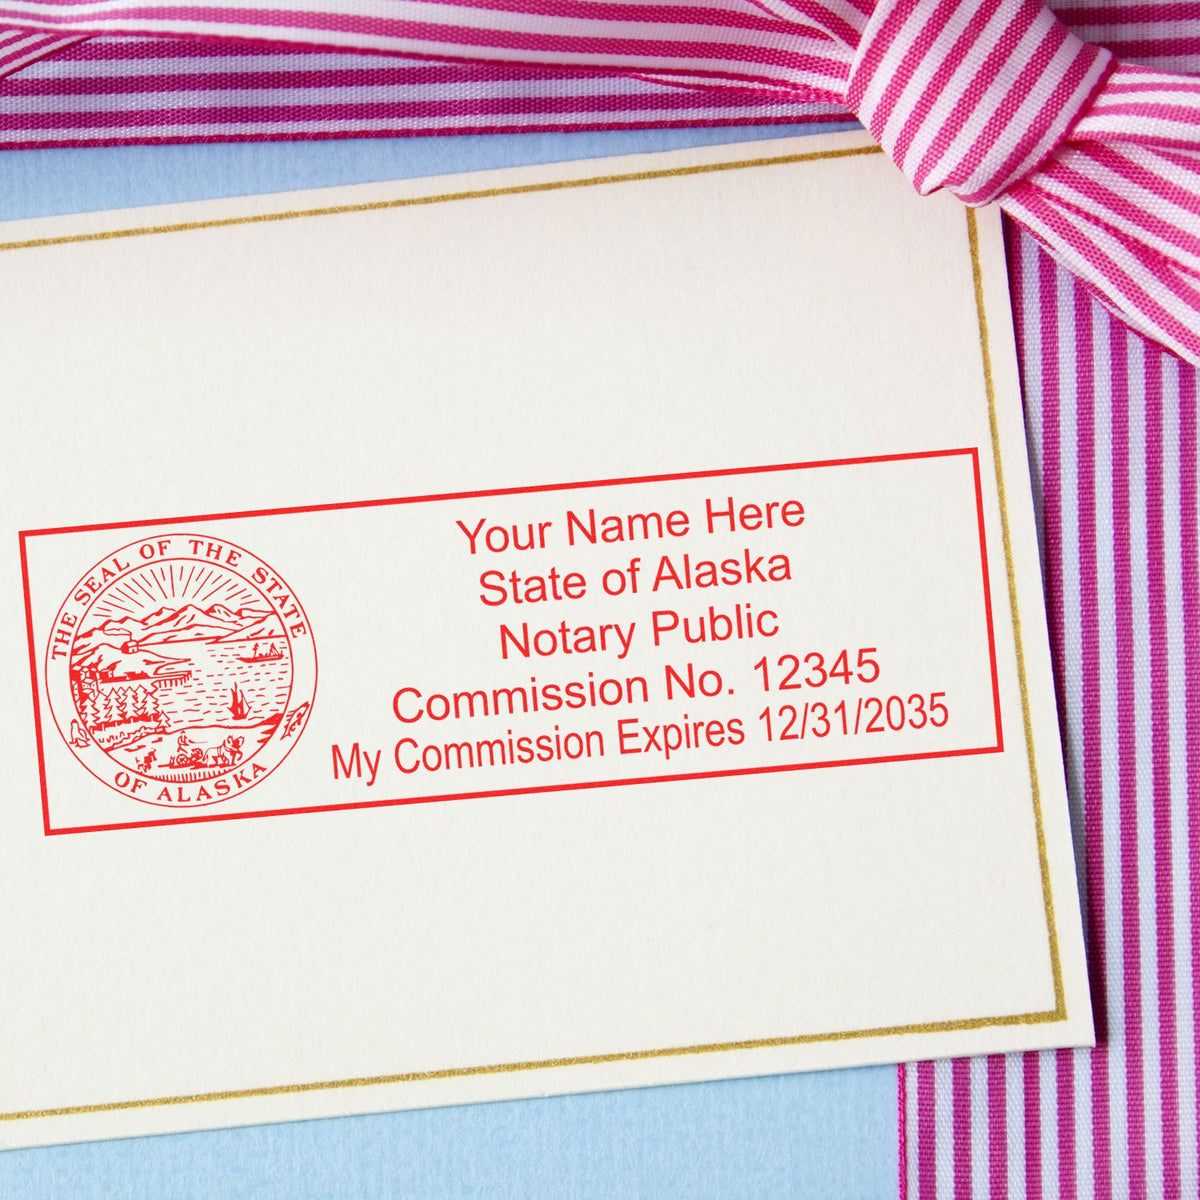 A stamped impression of the PSI Alaska Notary Stamp in this stylish lifestyle photo, setting the tone for a unique and personalized product.